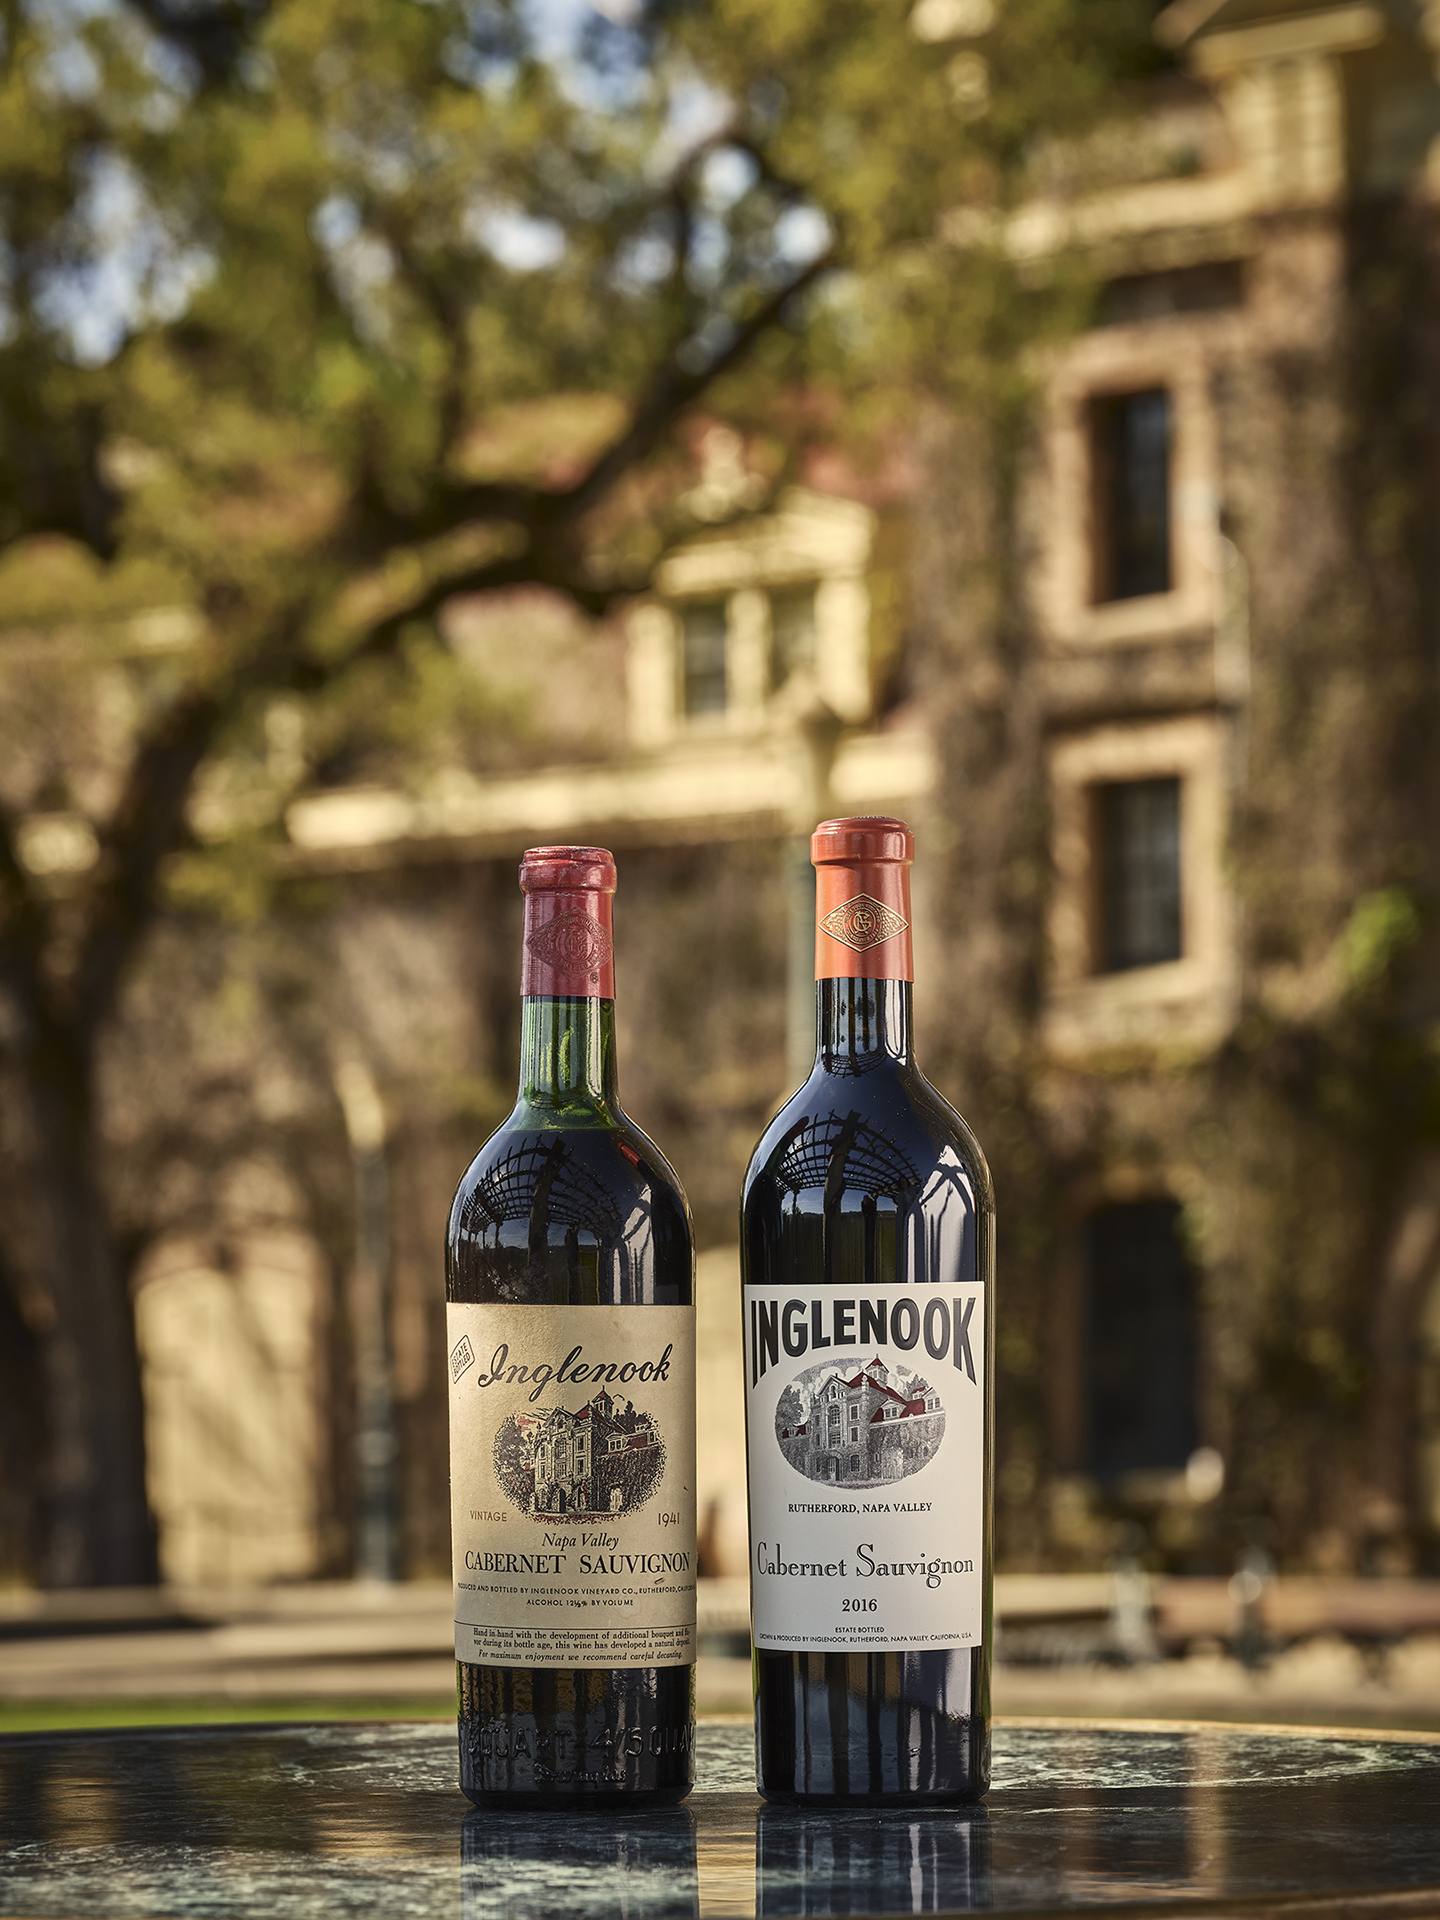 Old and new bottles of Inglenook Cabernet Sauvignon sit on a round green marble table in front of the grand stone facade of the Inglenook Chateau.